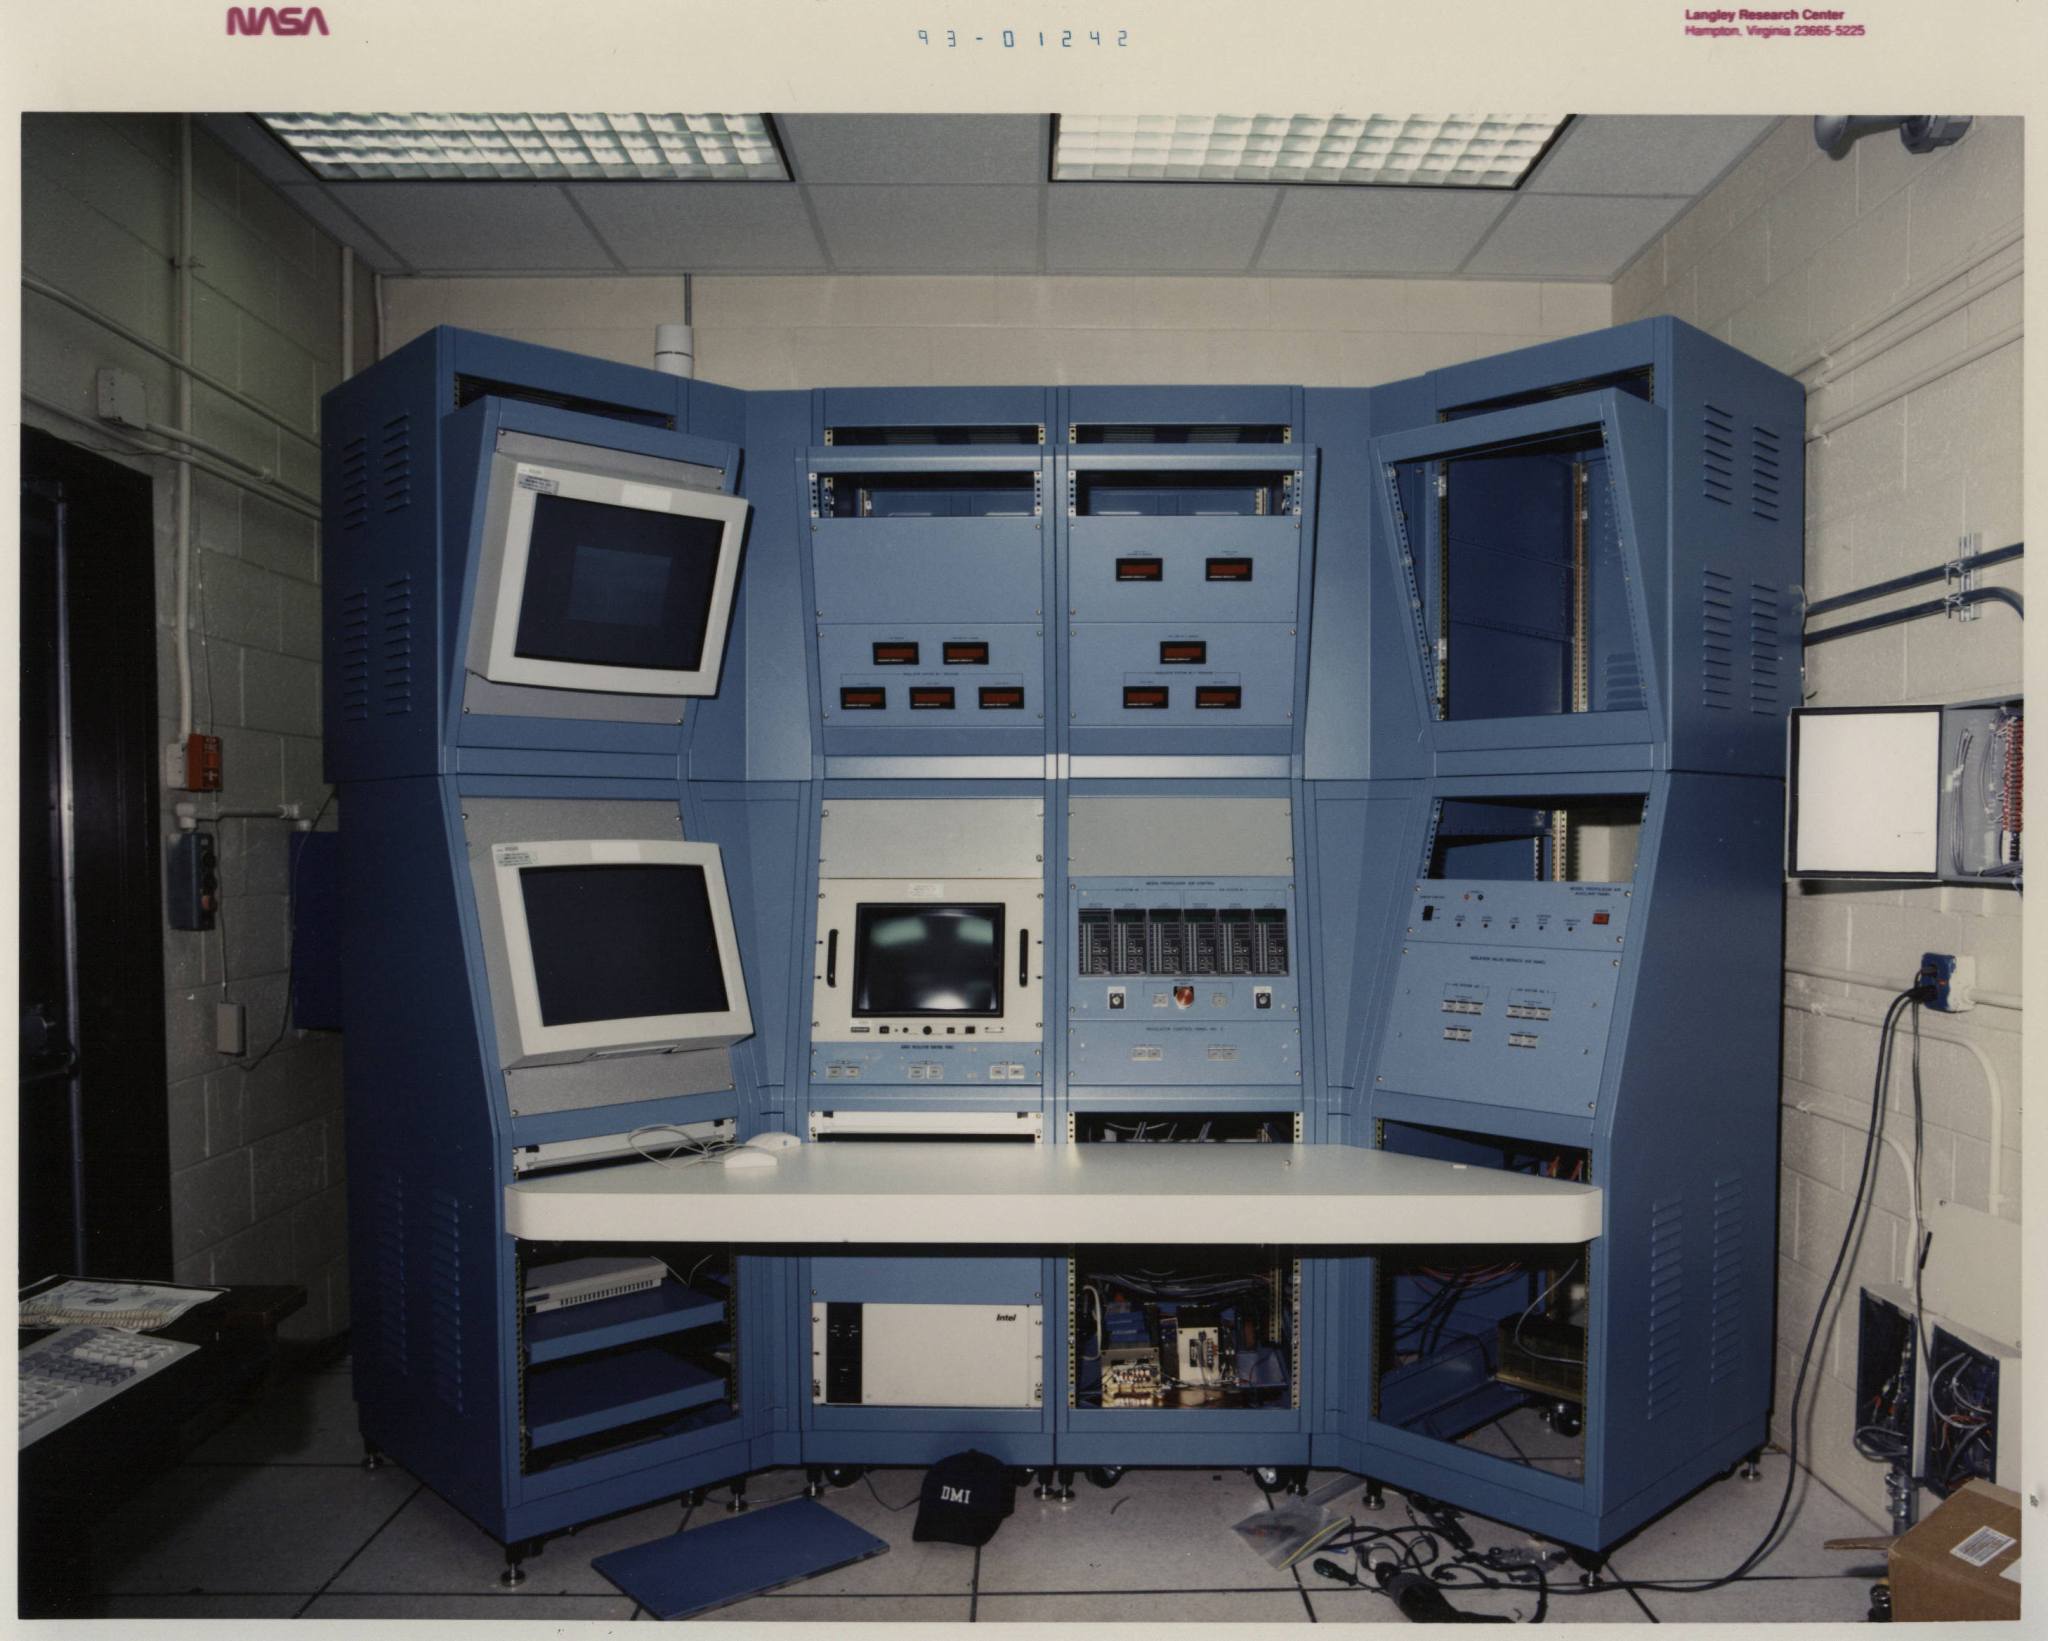 The Jet Exit Facility’s control room as seen in 1993.